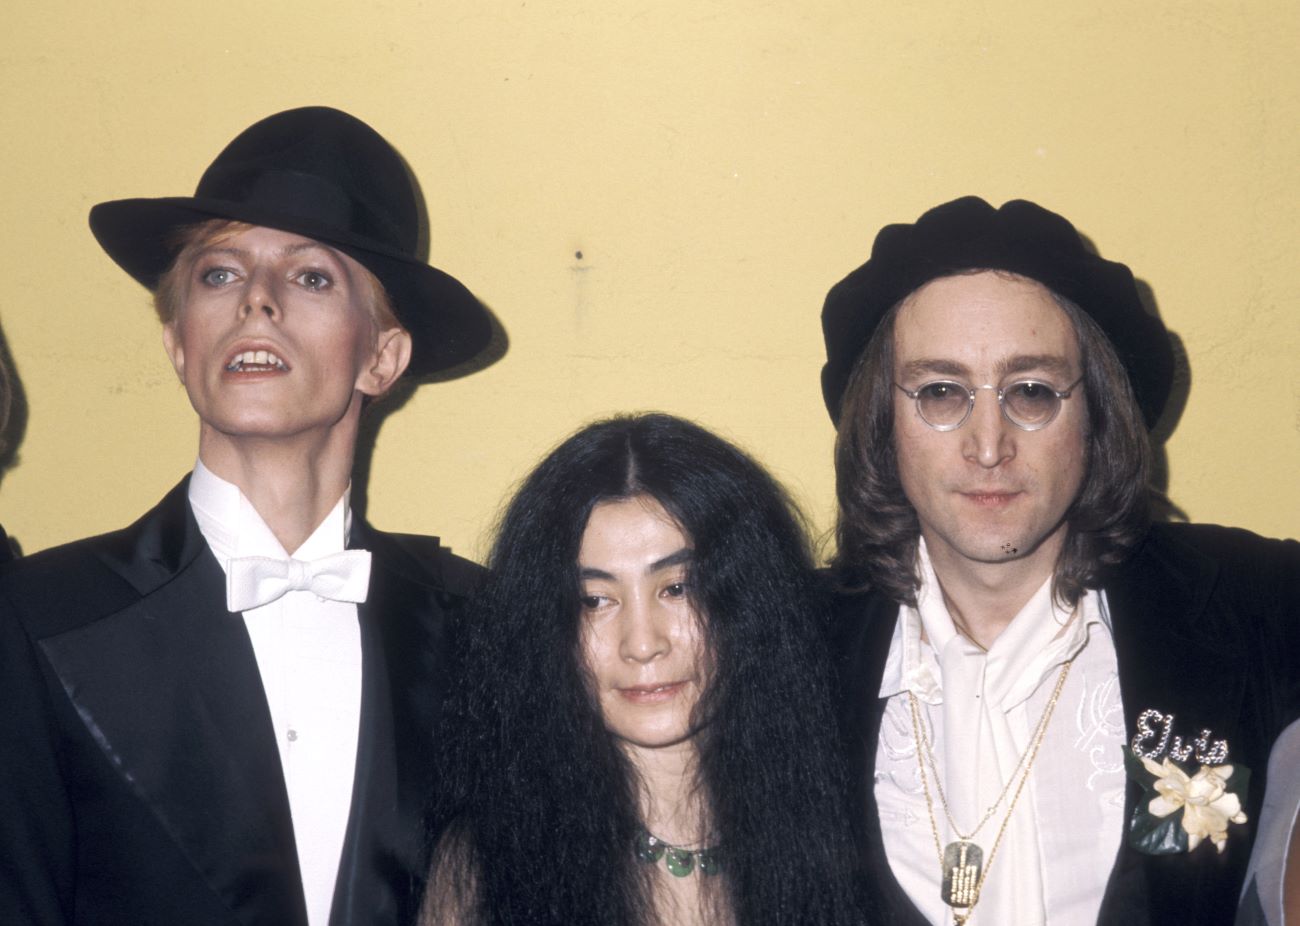 David Bowie, Yoko Ono, and John Lennon pose in front of a yellow background. 